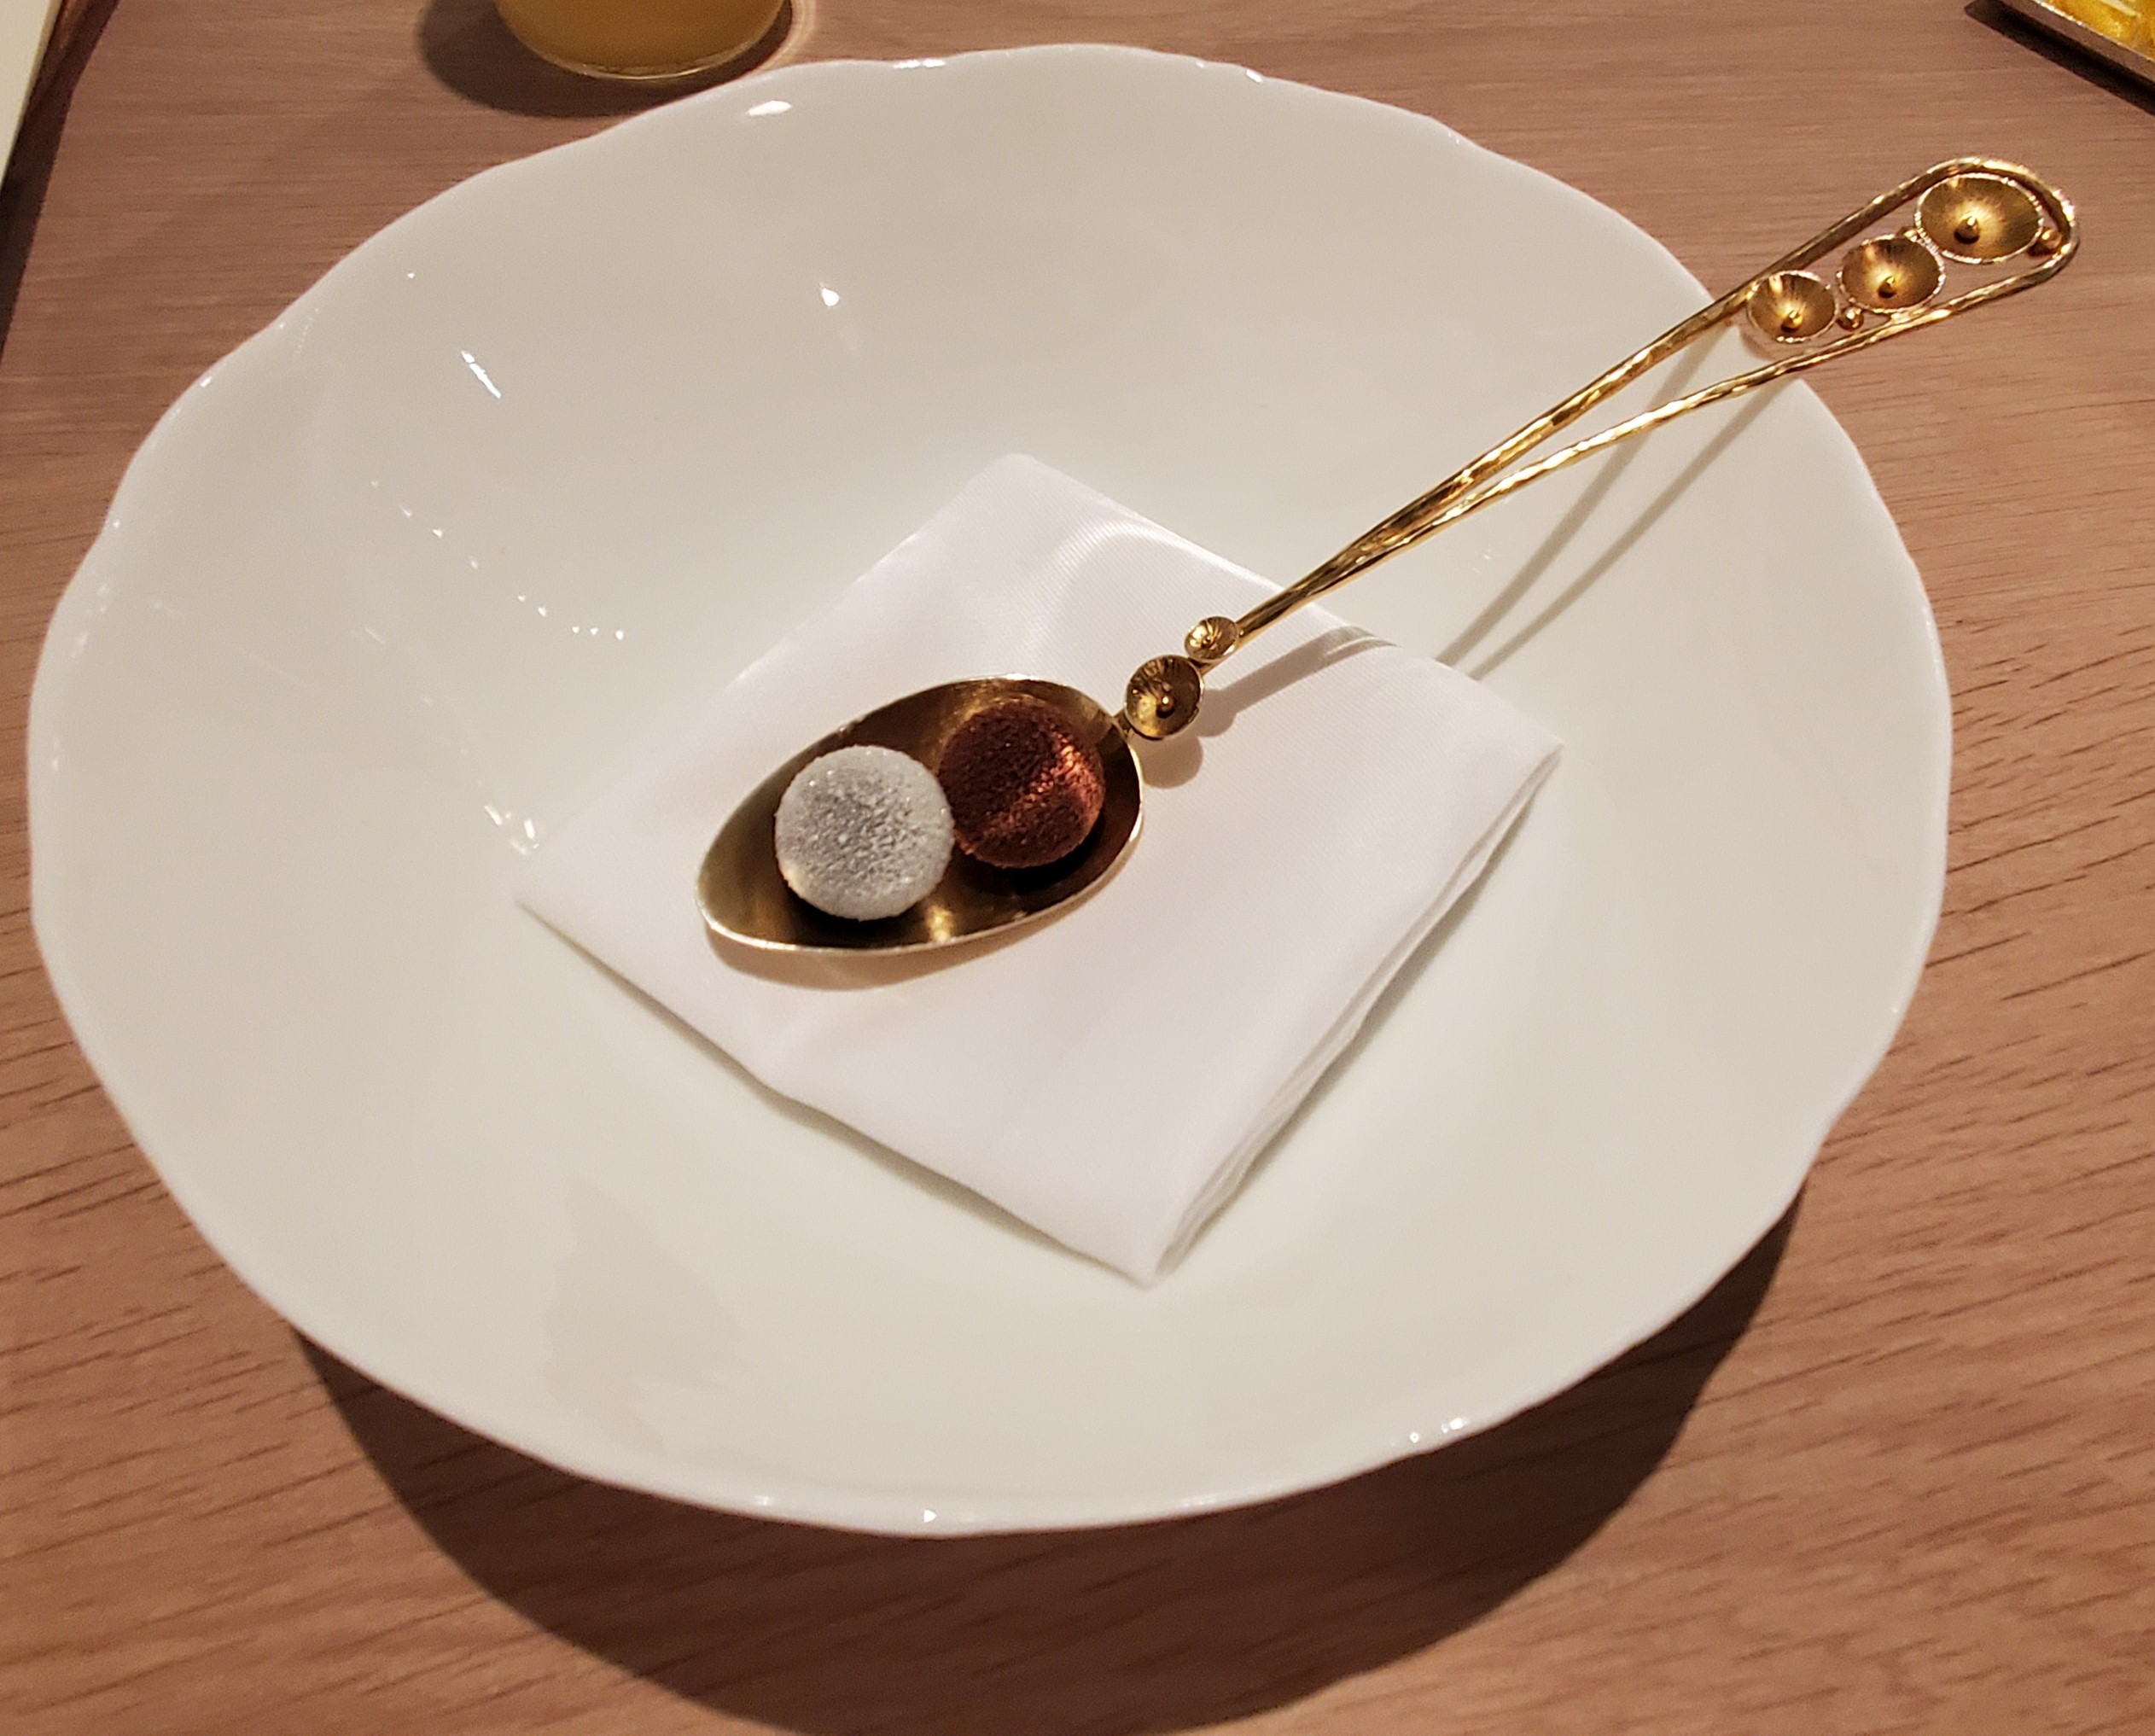 a spoon on a plate